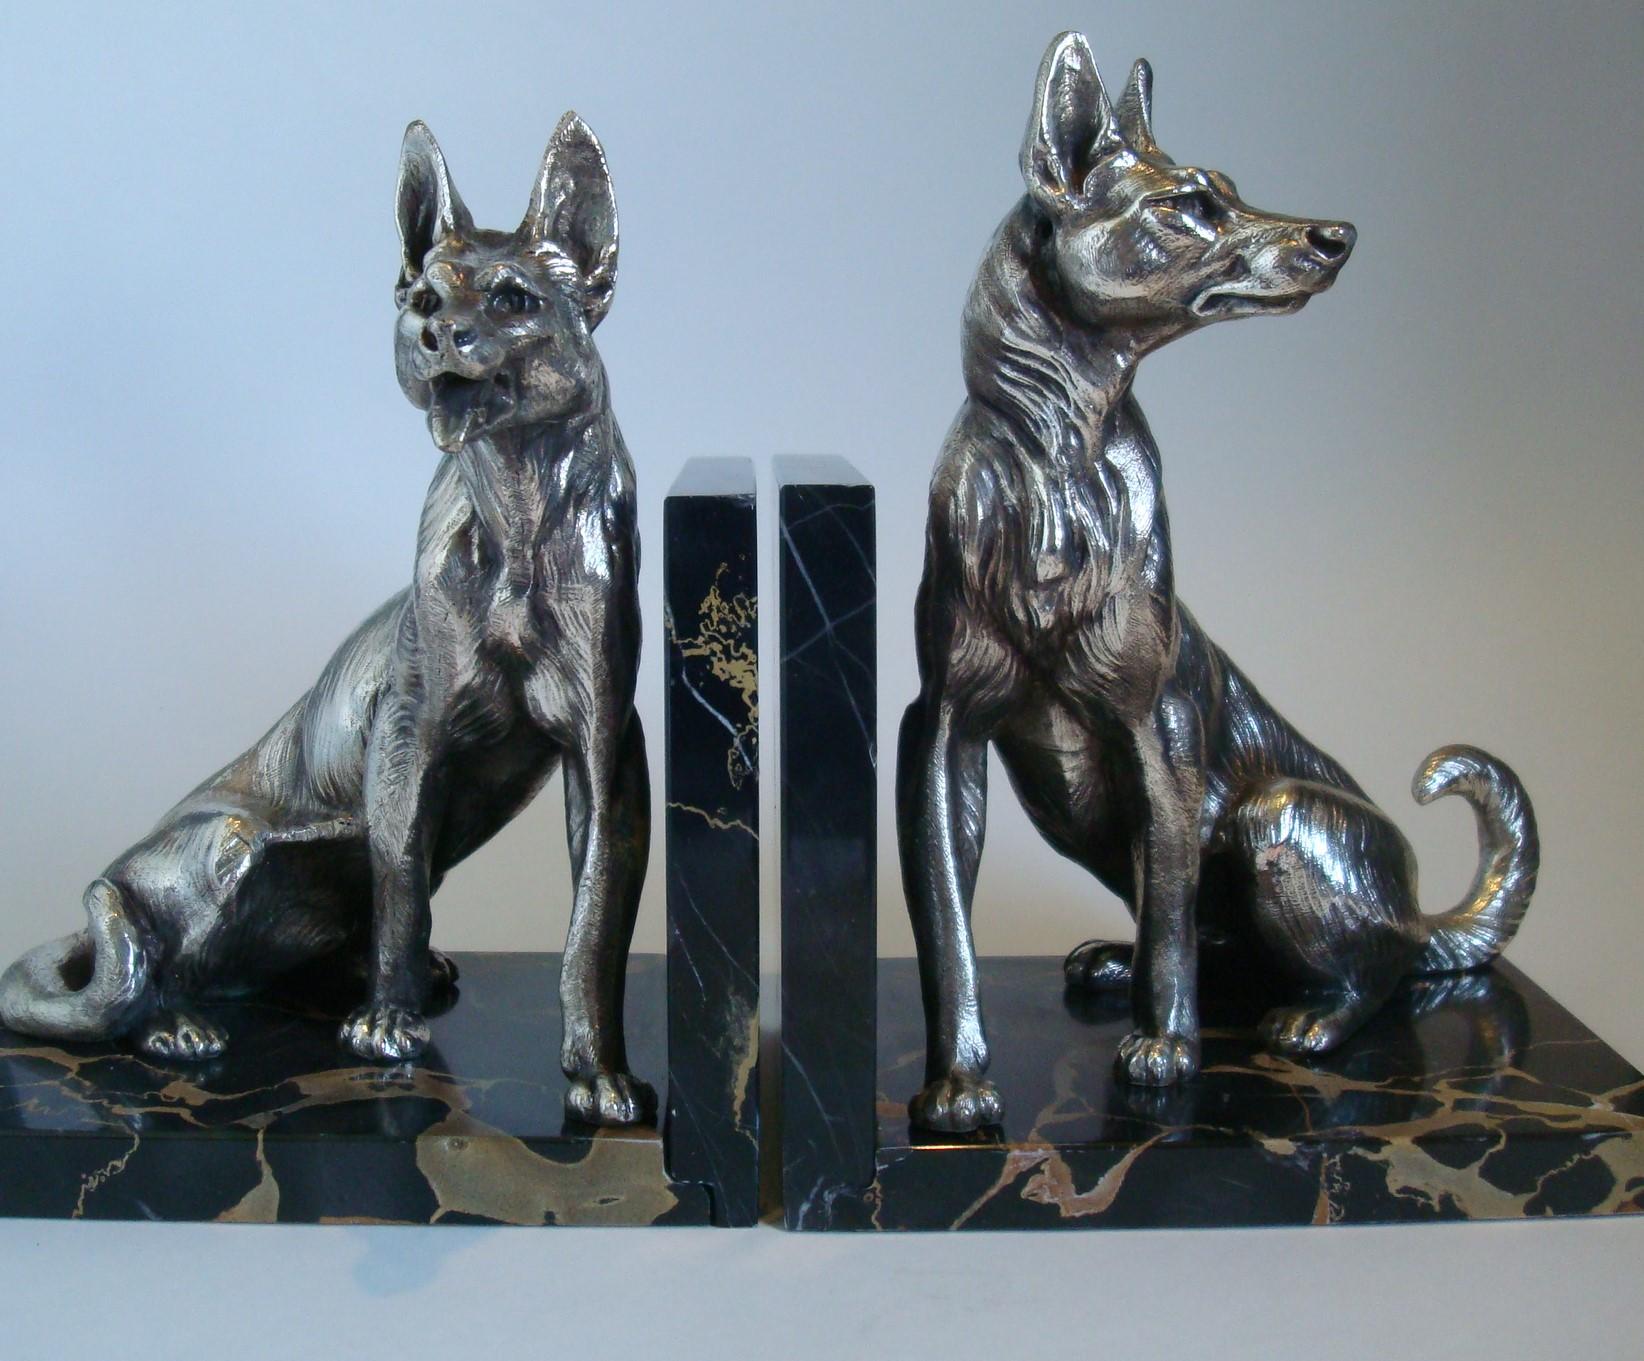 German Shepherd dog sculpture bookends by Louis-Albert Carvin.
Louis-Albert Carvin Dog Animalier Art Deco Sculpture Bookends in Marble and Silvered Metal. Pair of large Silvered Metal Sculptures of two German shepherds mounted on marble bases by